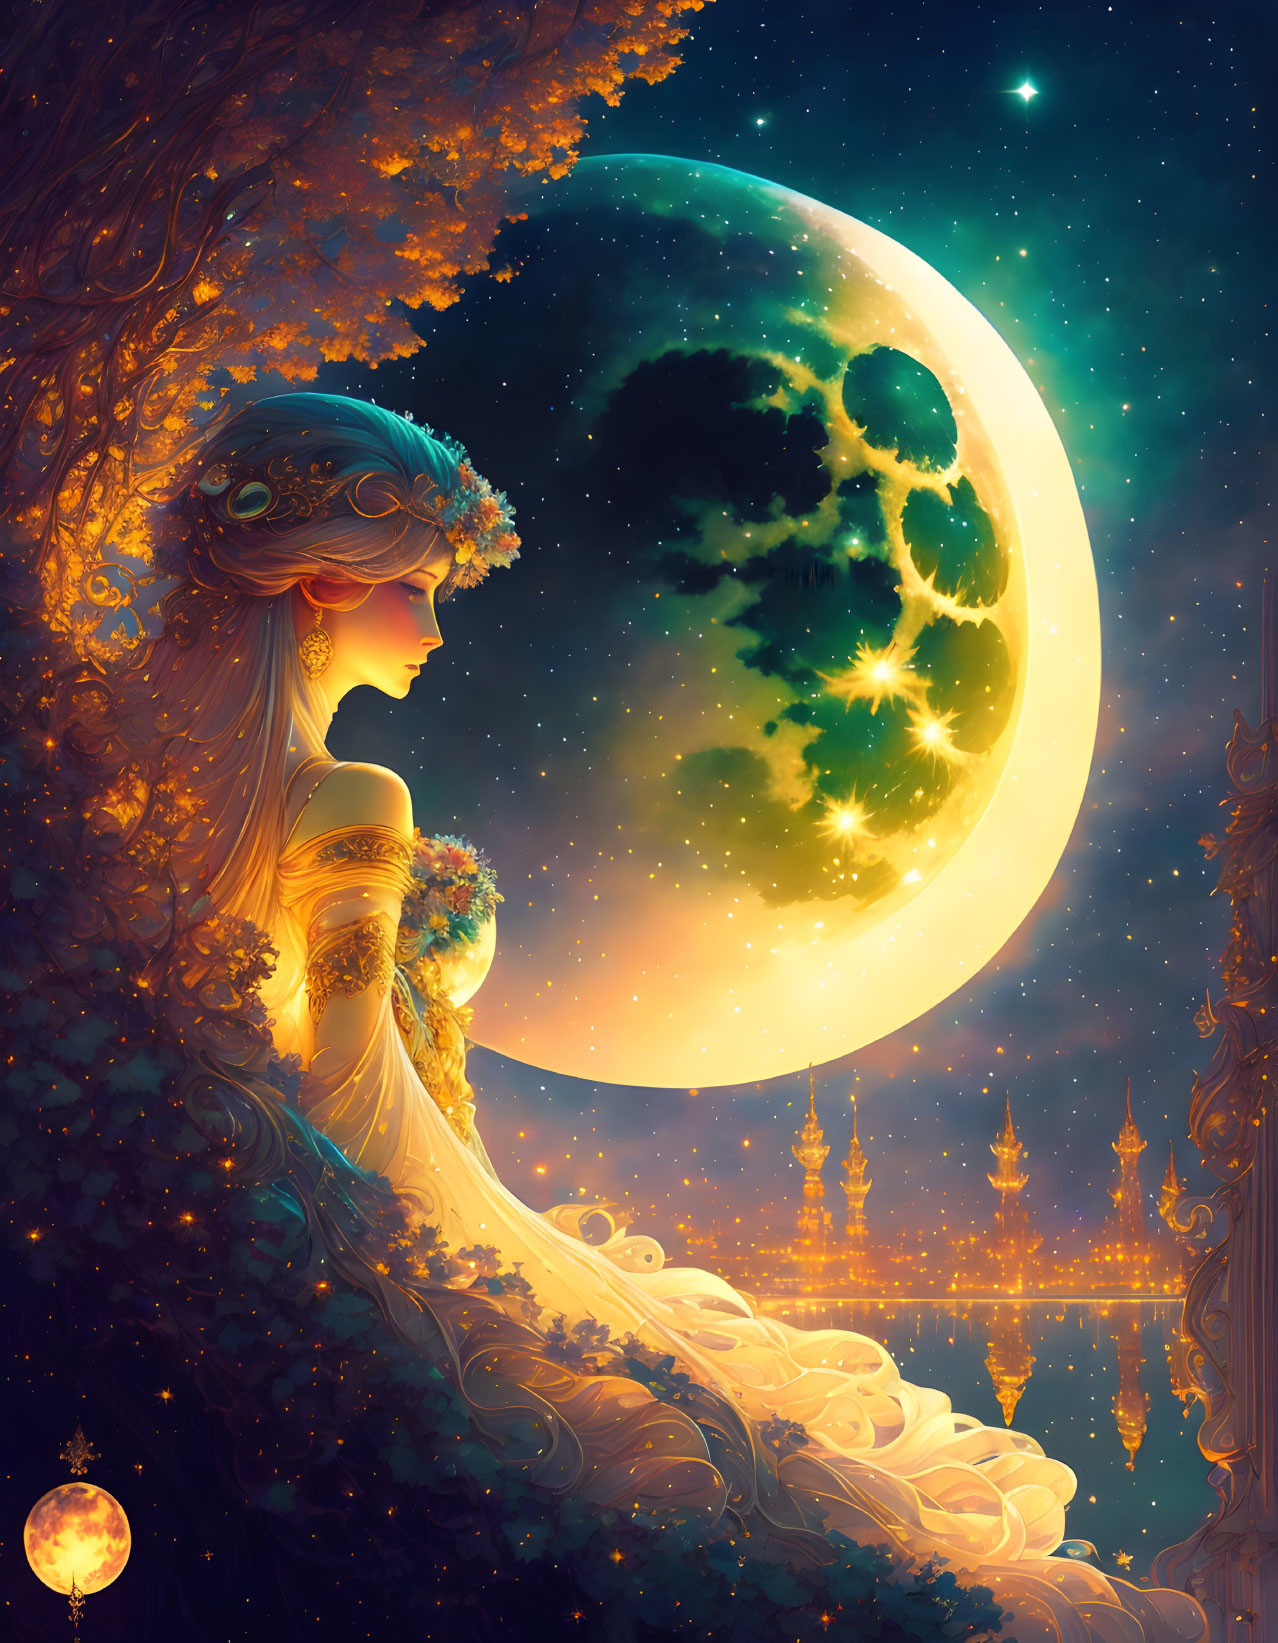 Illustration of woman in flowing dress with crescent moon and stars, golden architecture